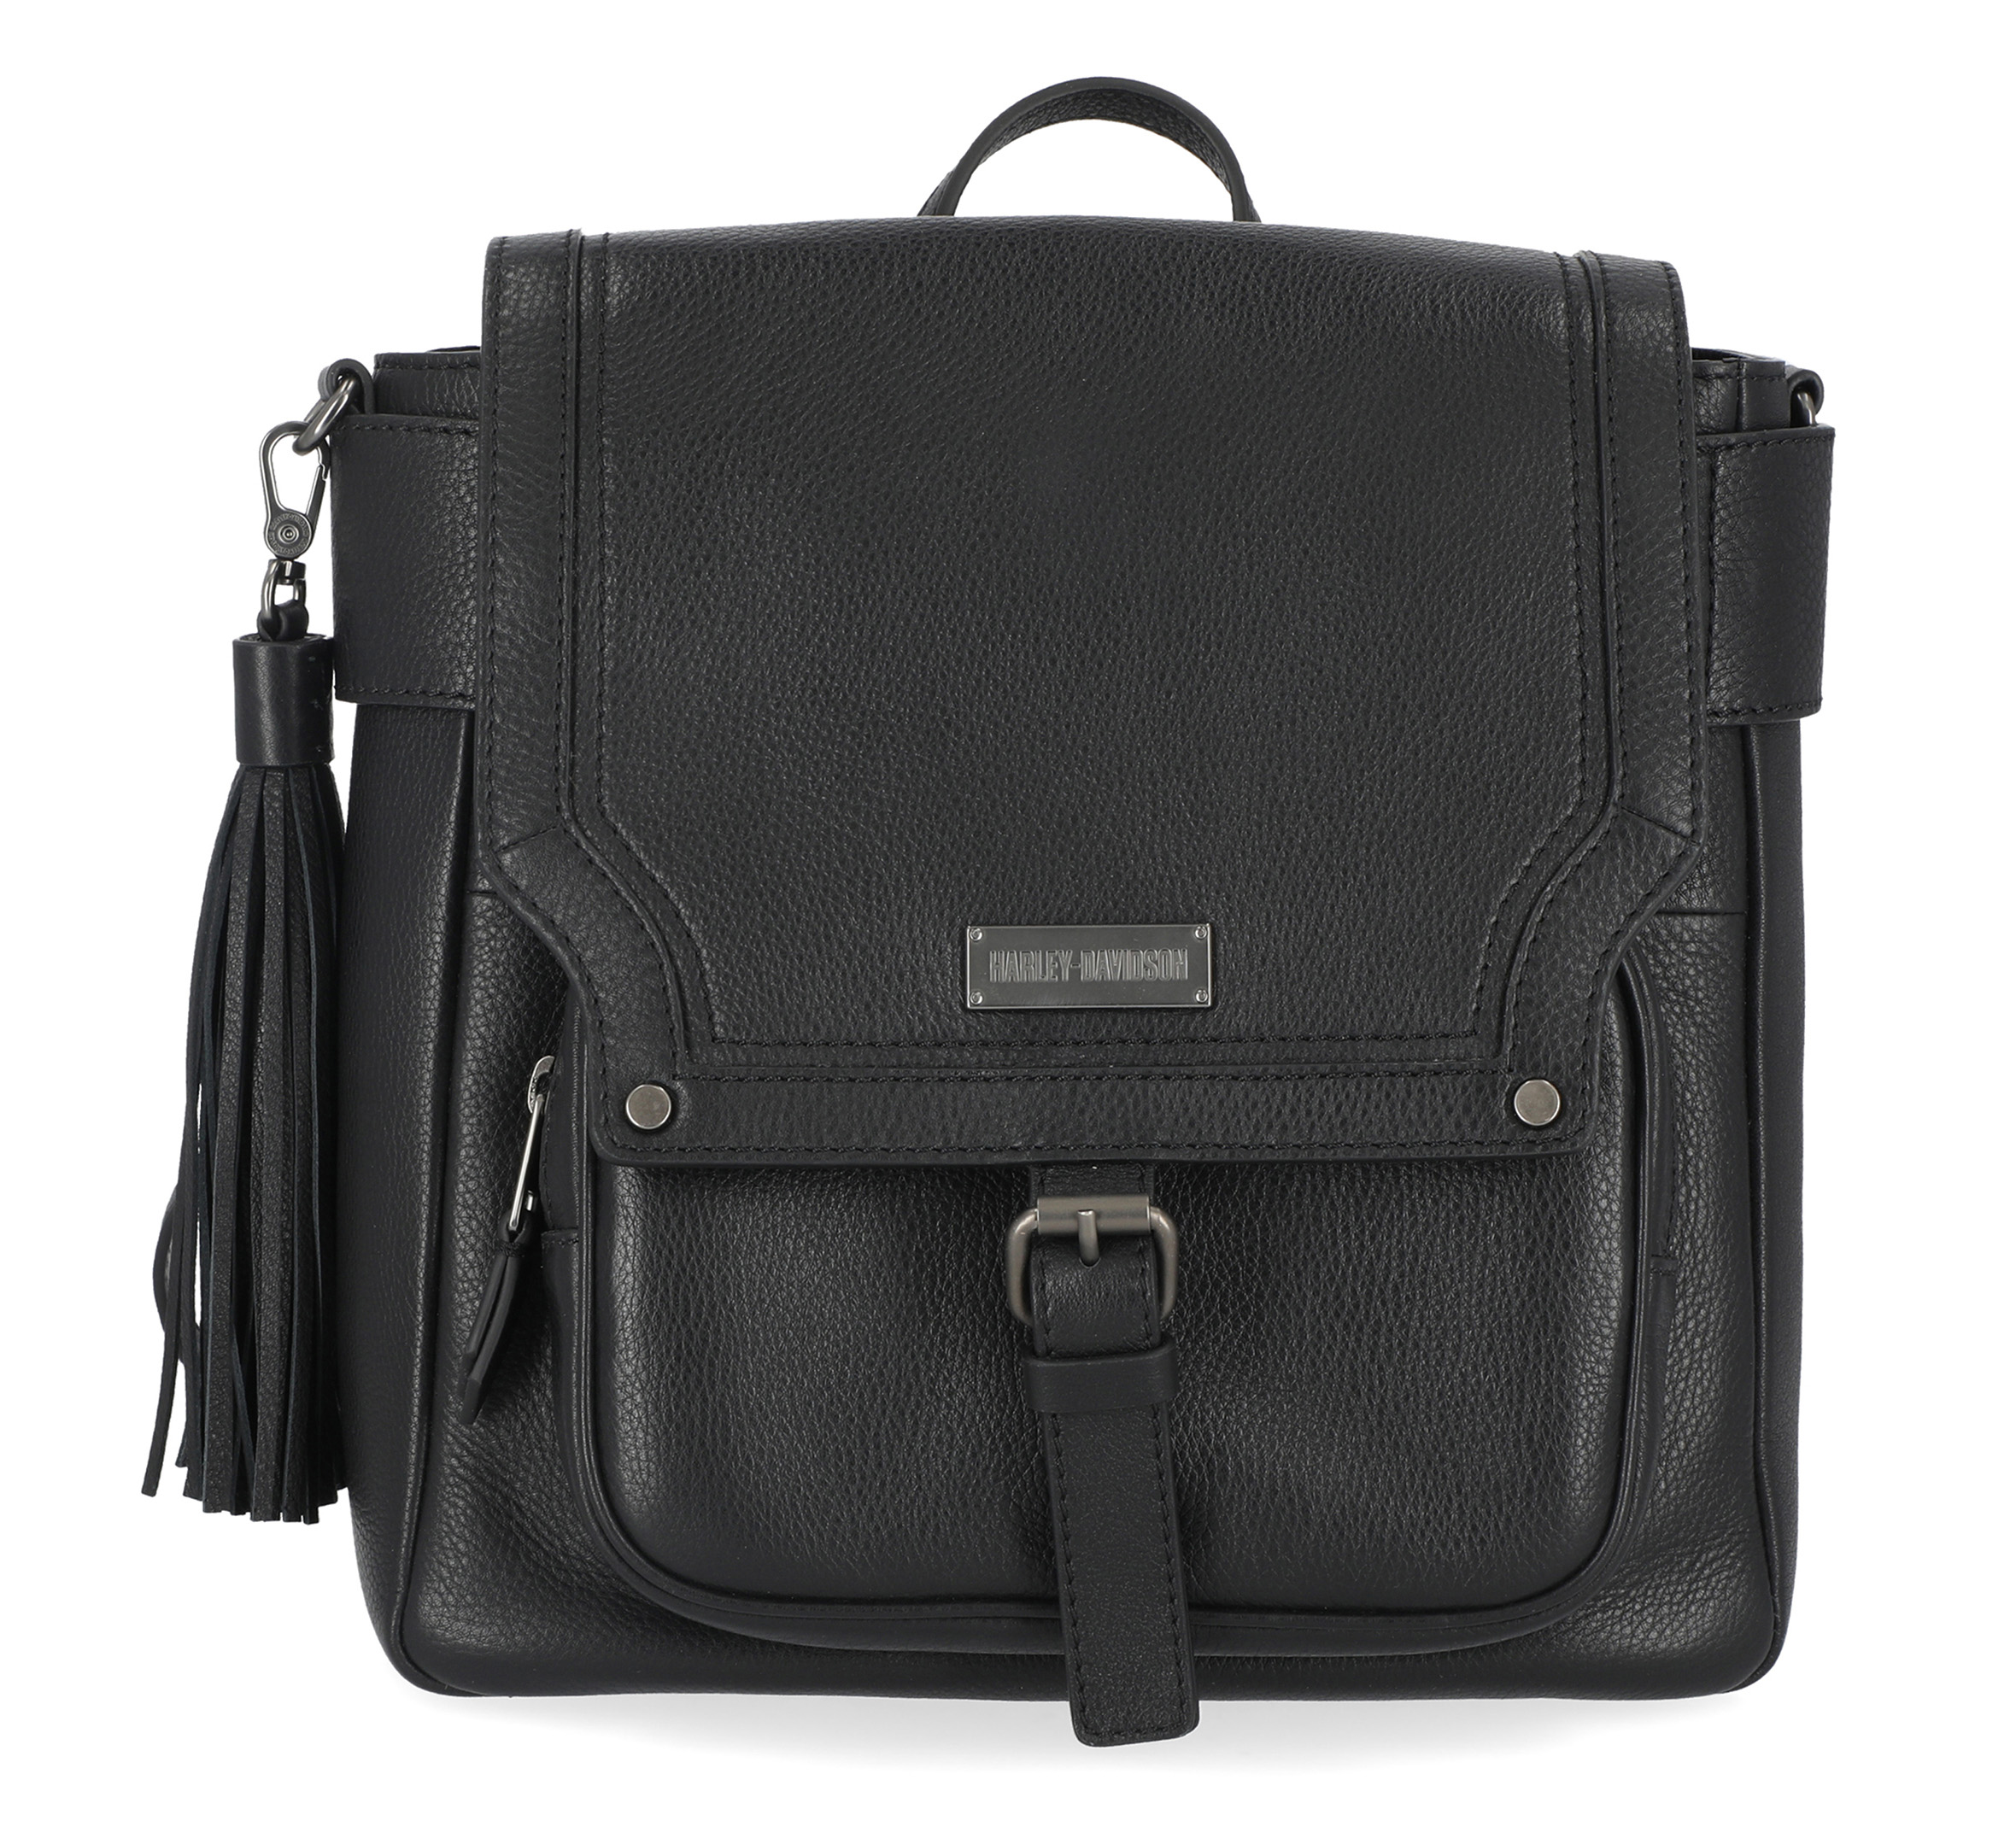 Women's Classic Leather Backpack Black